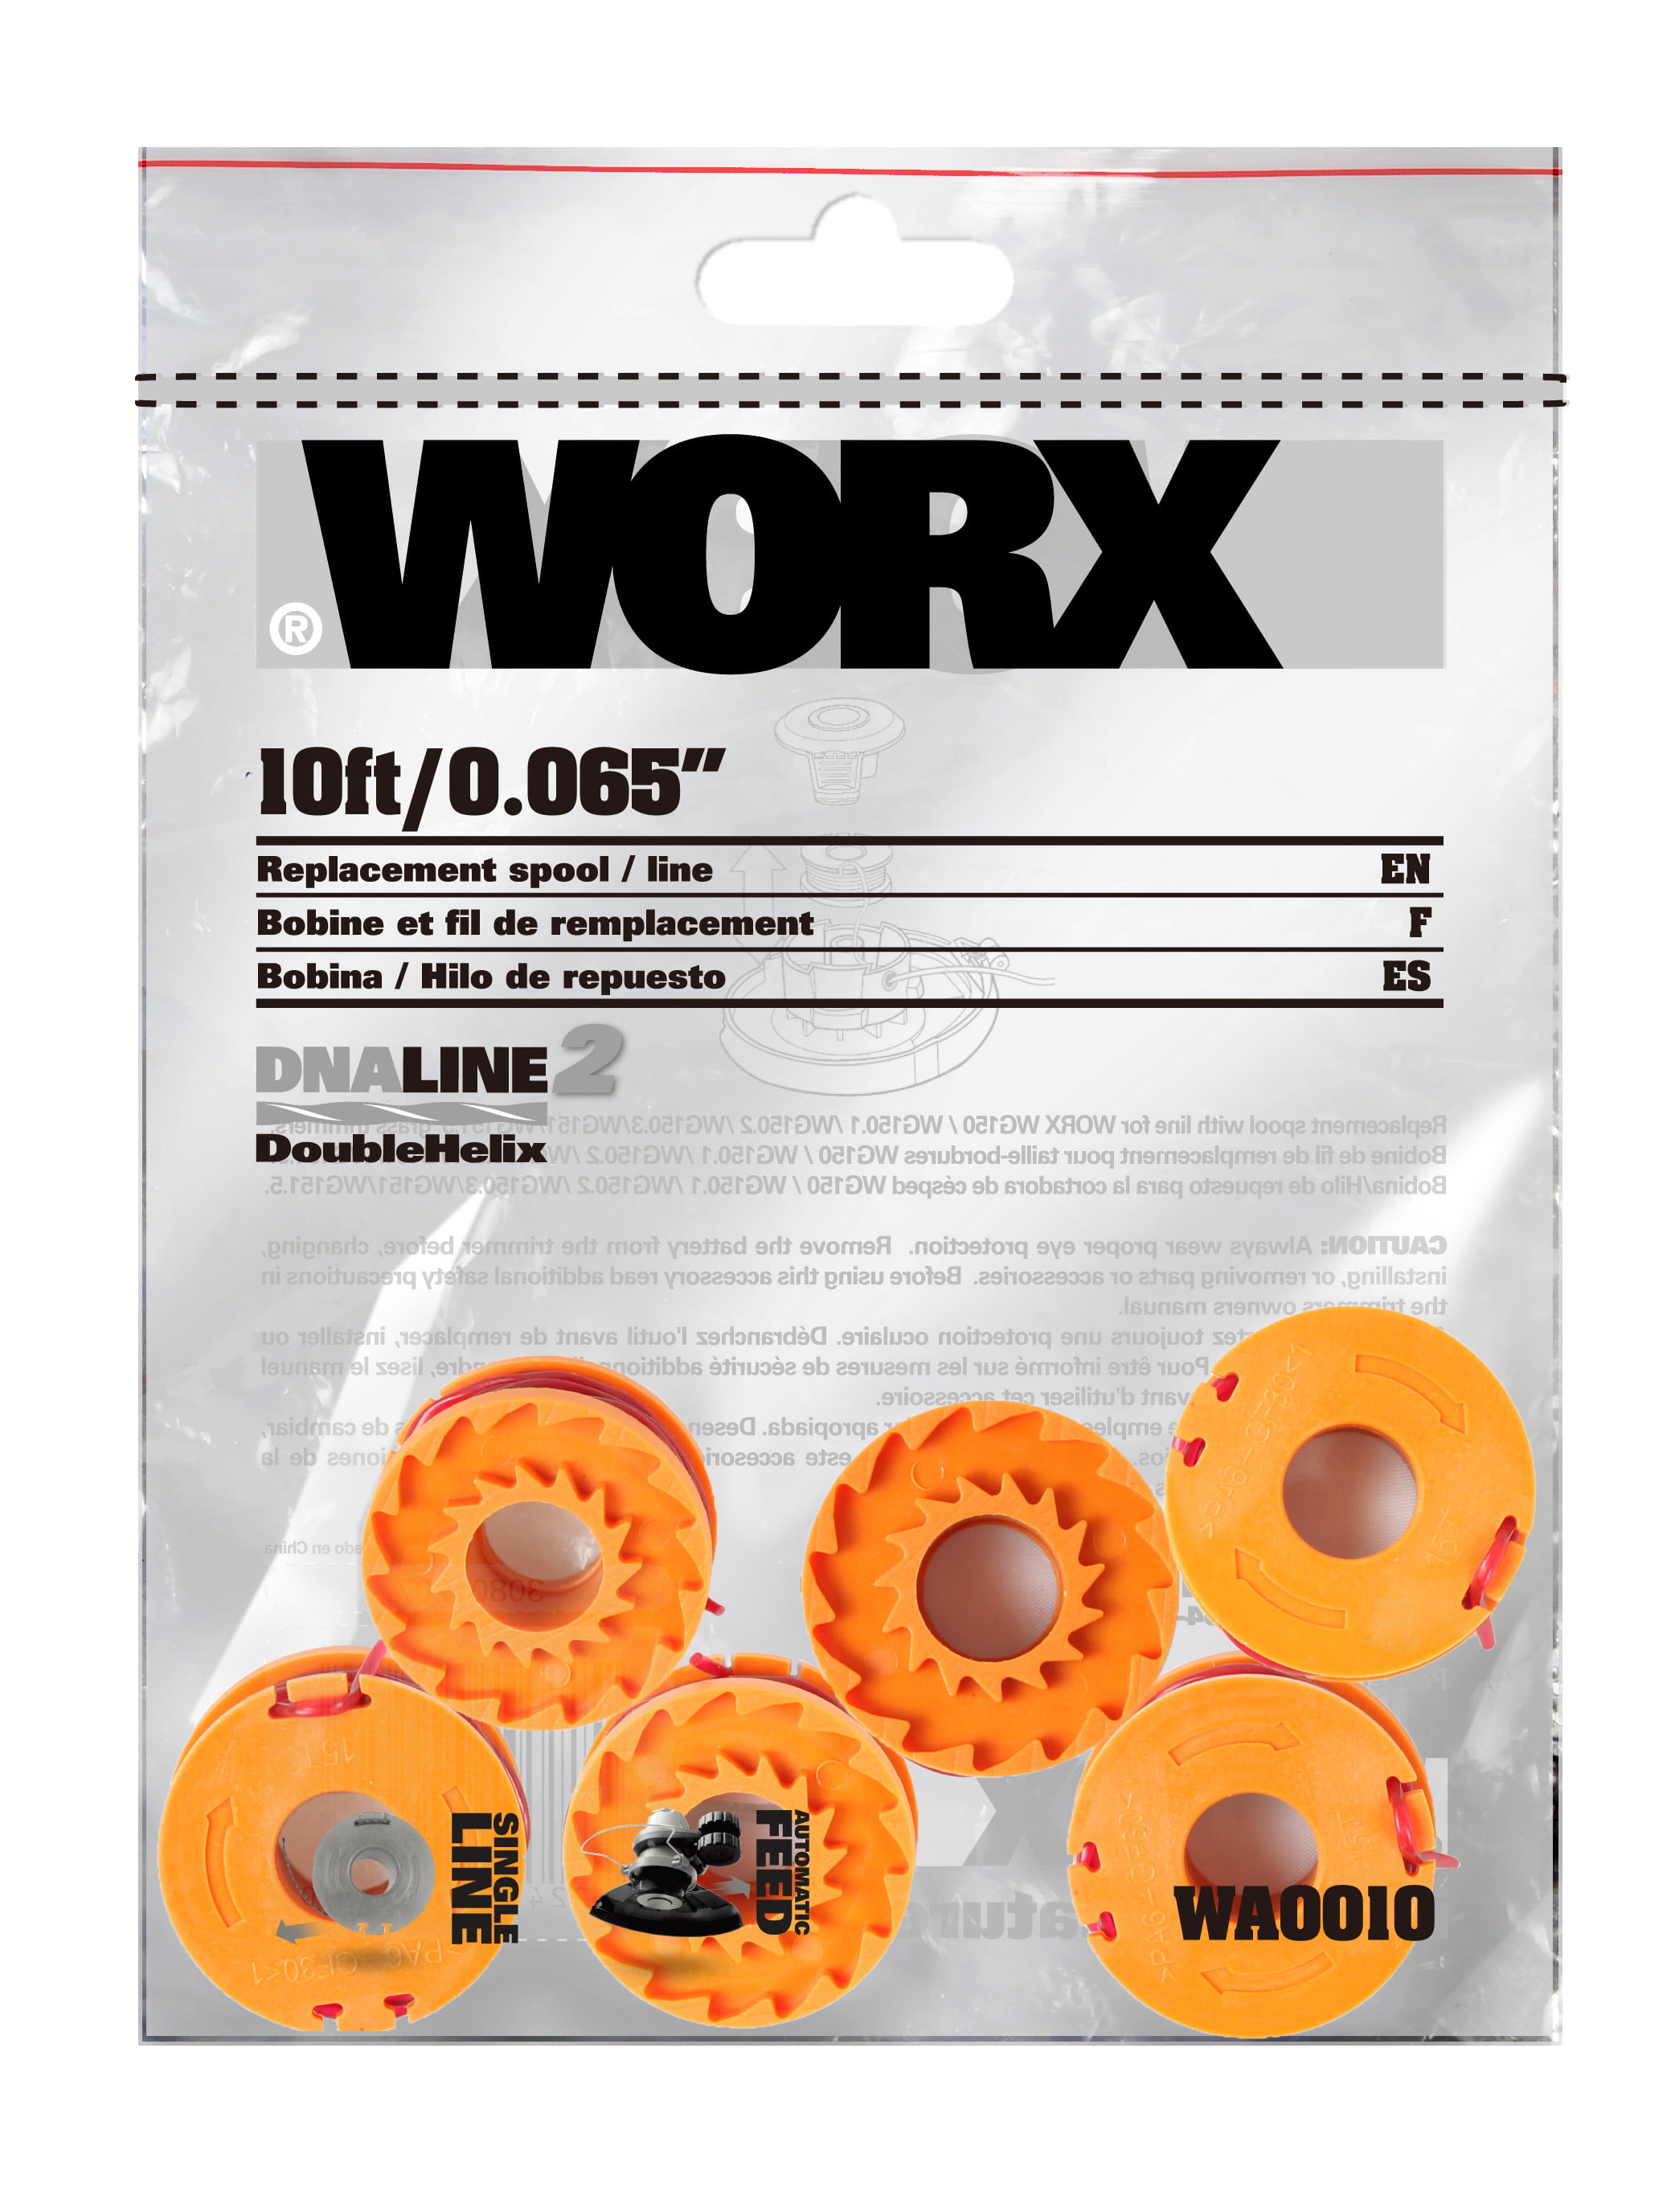 6 2 WA0010 and Spool Cap Cover WA6531 - 8 Pack Worx GT Grass Trimmer Spool Line 